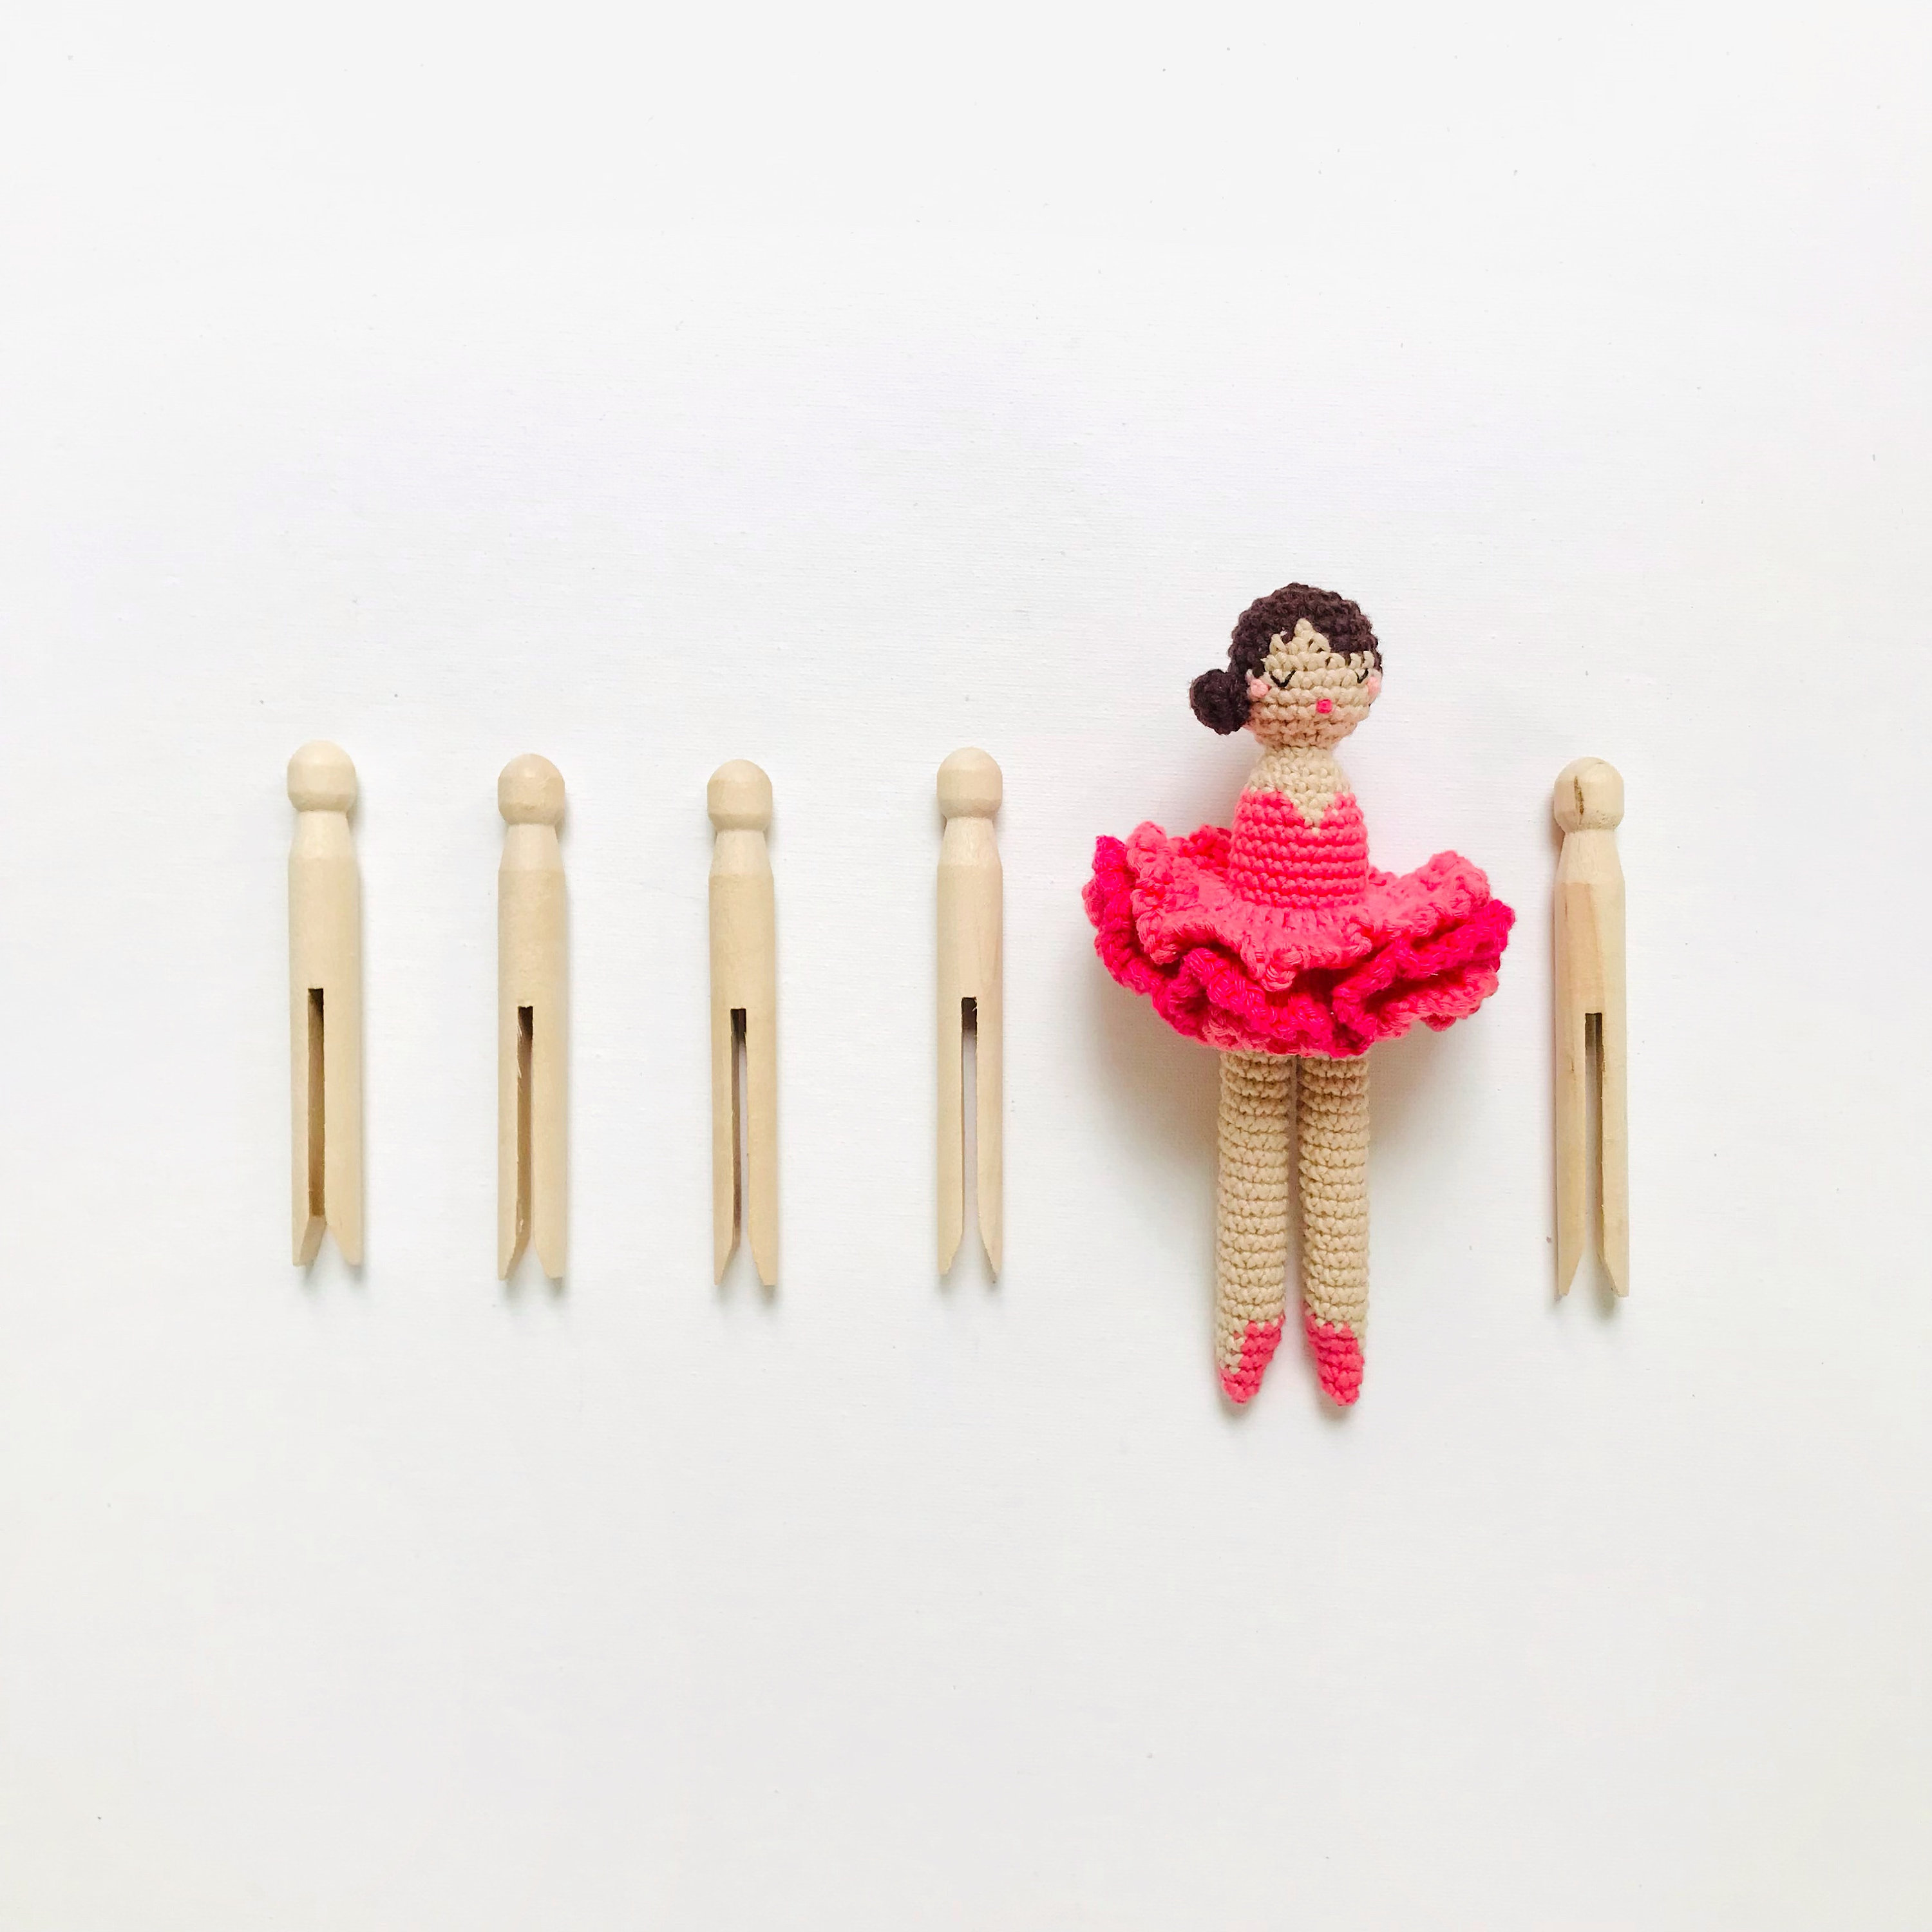 Wooden Doll Pins - 25 Clothes Pins for Classroom and Craft